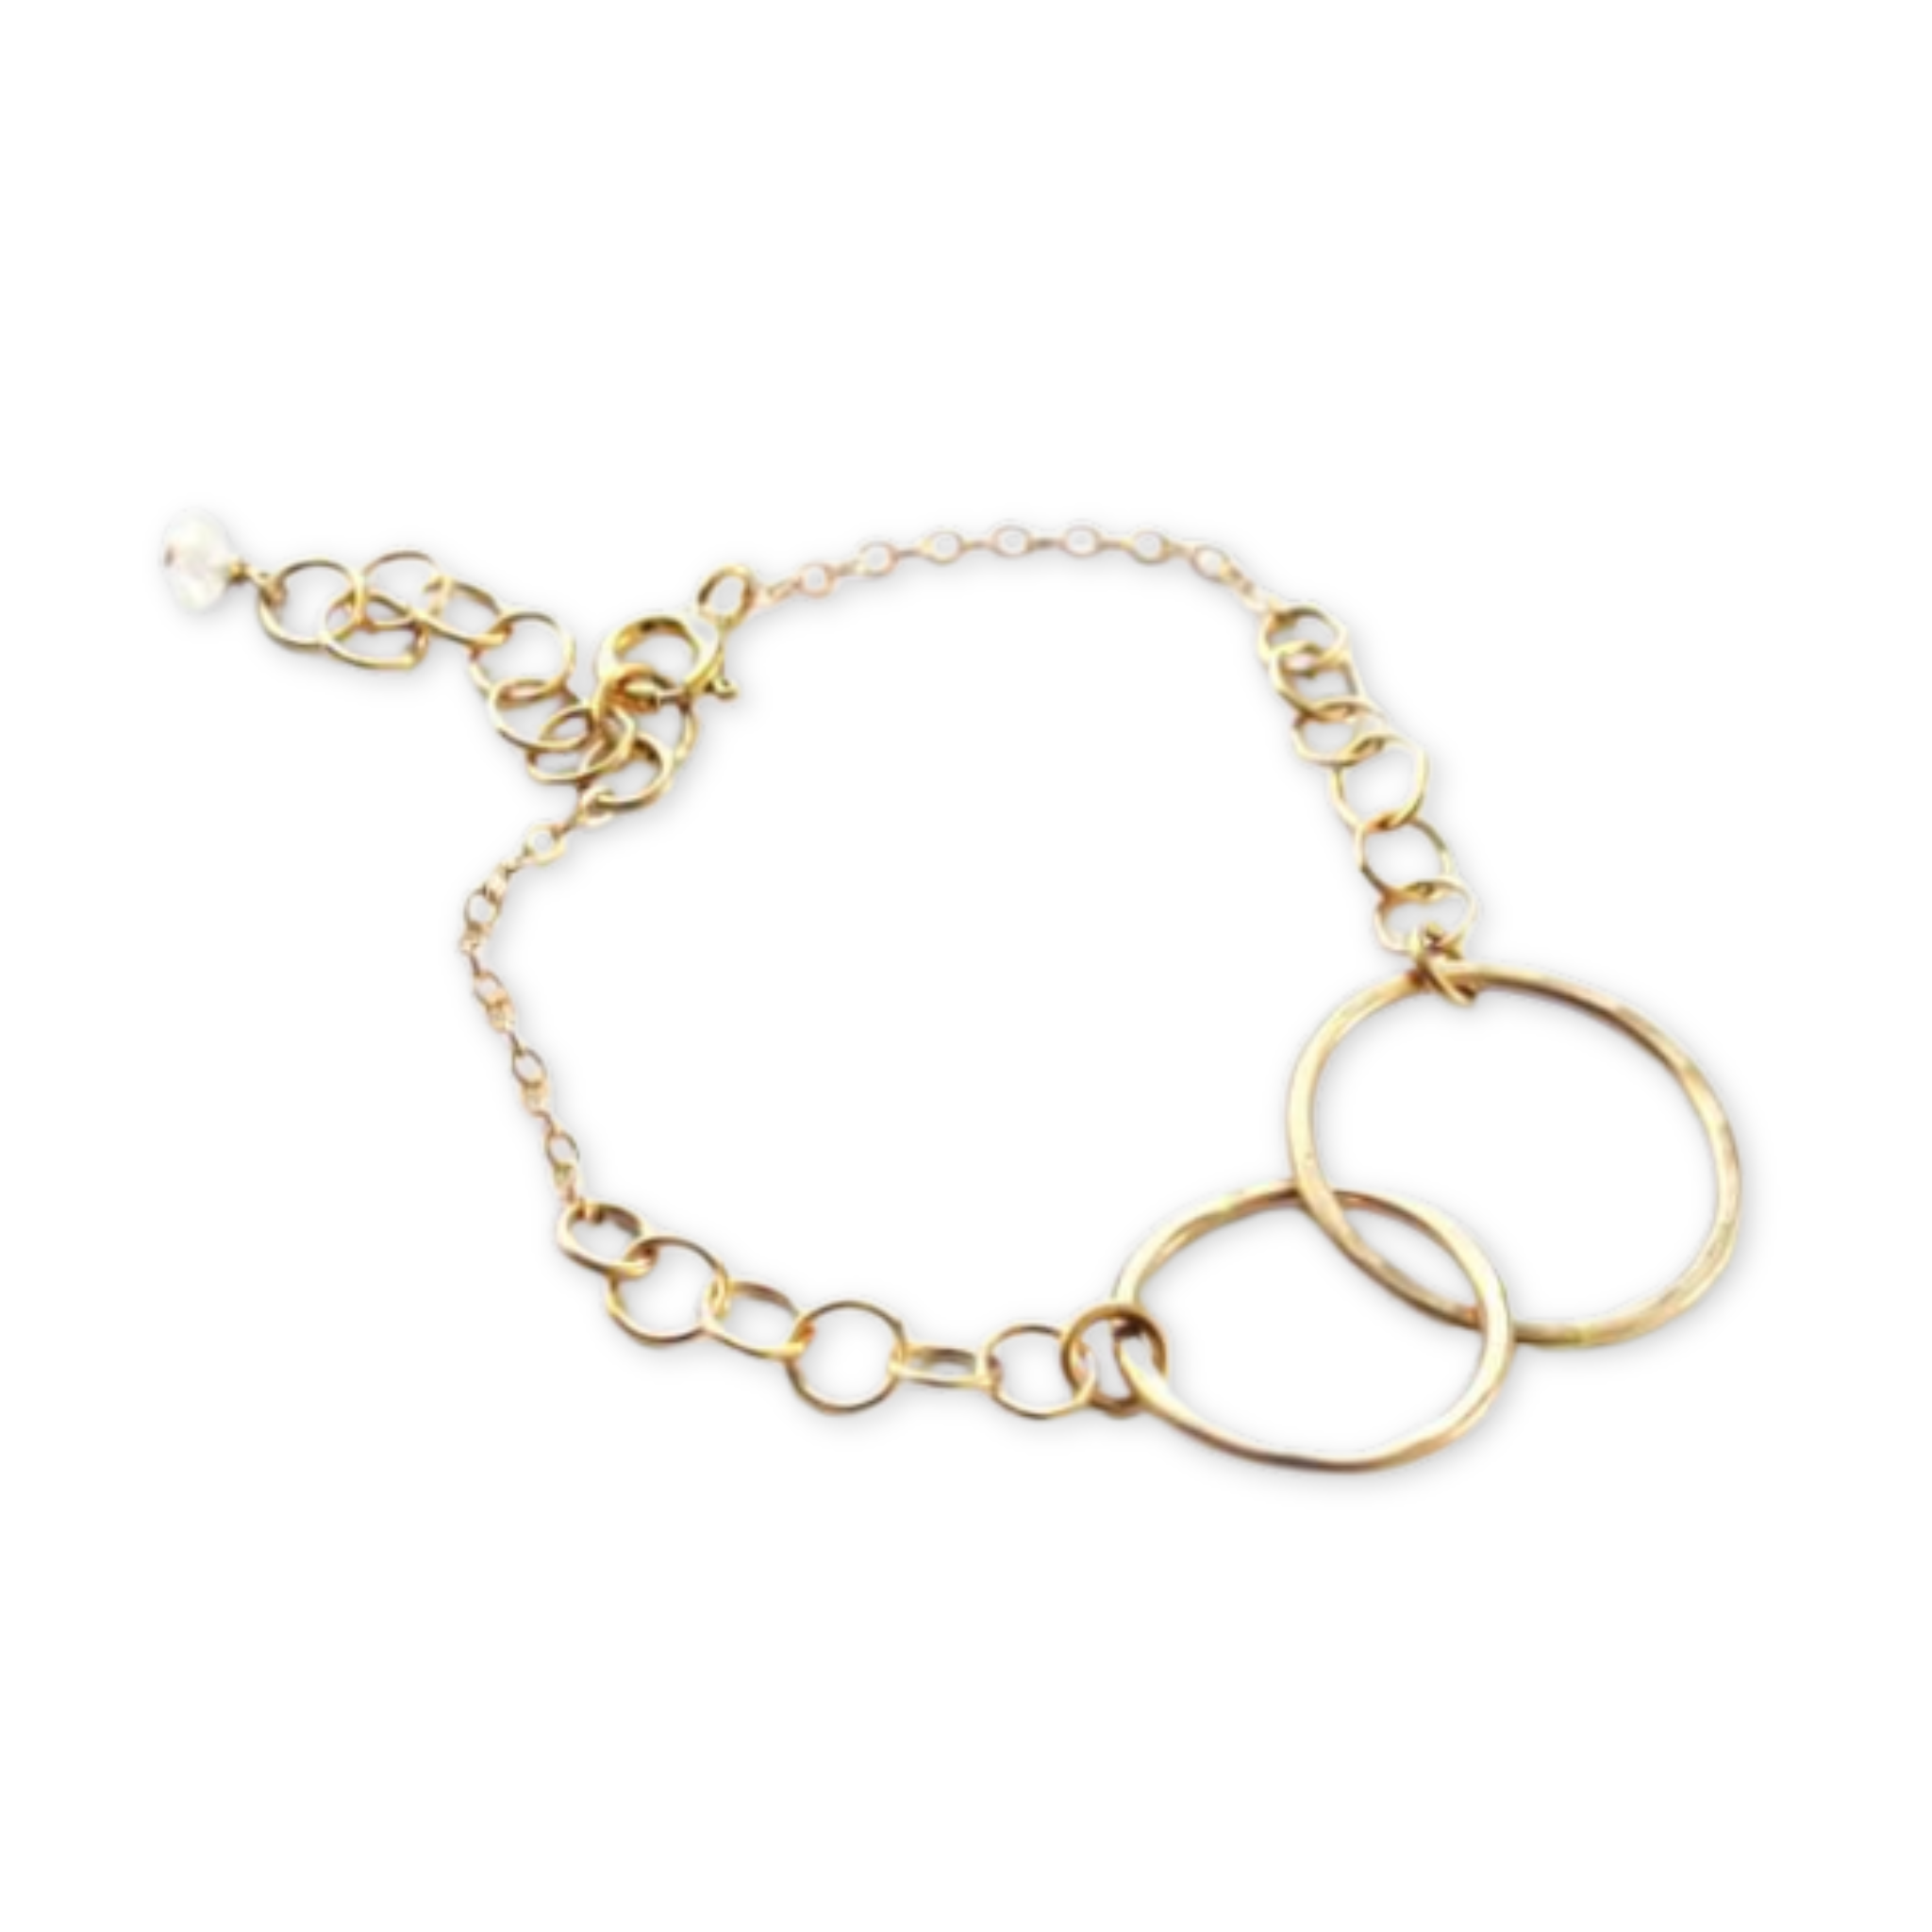 locking circles bracelet with an adjustable chain